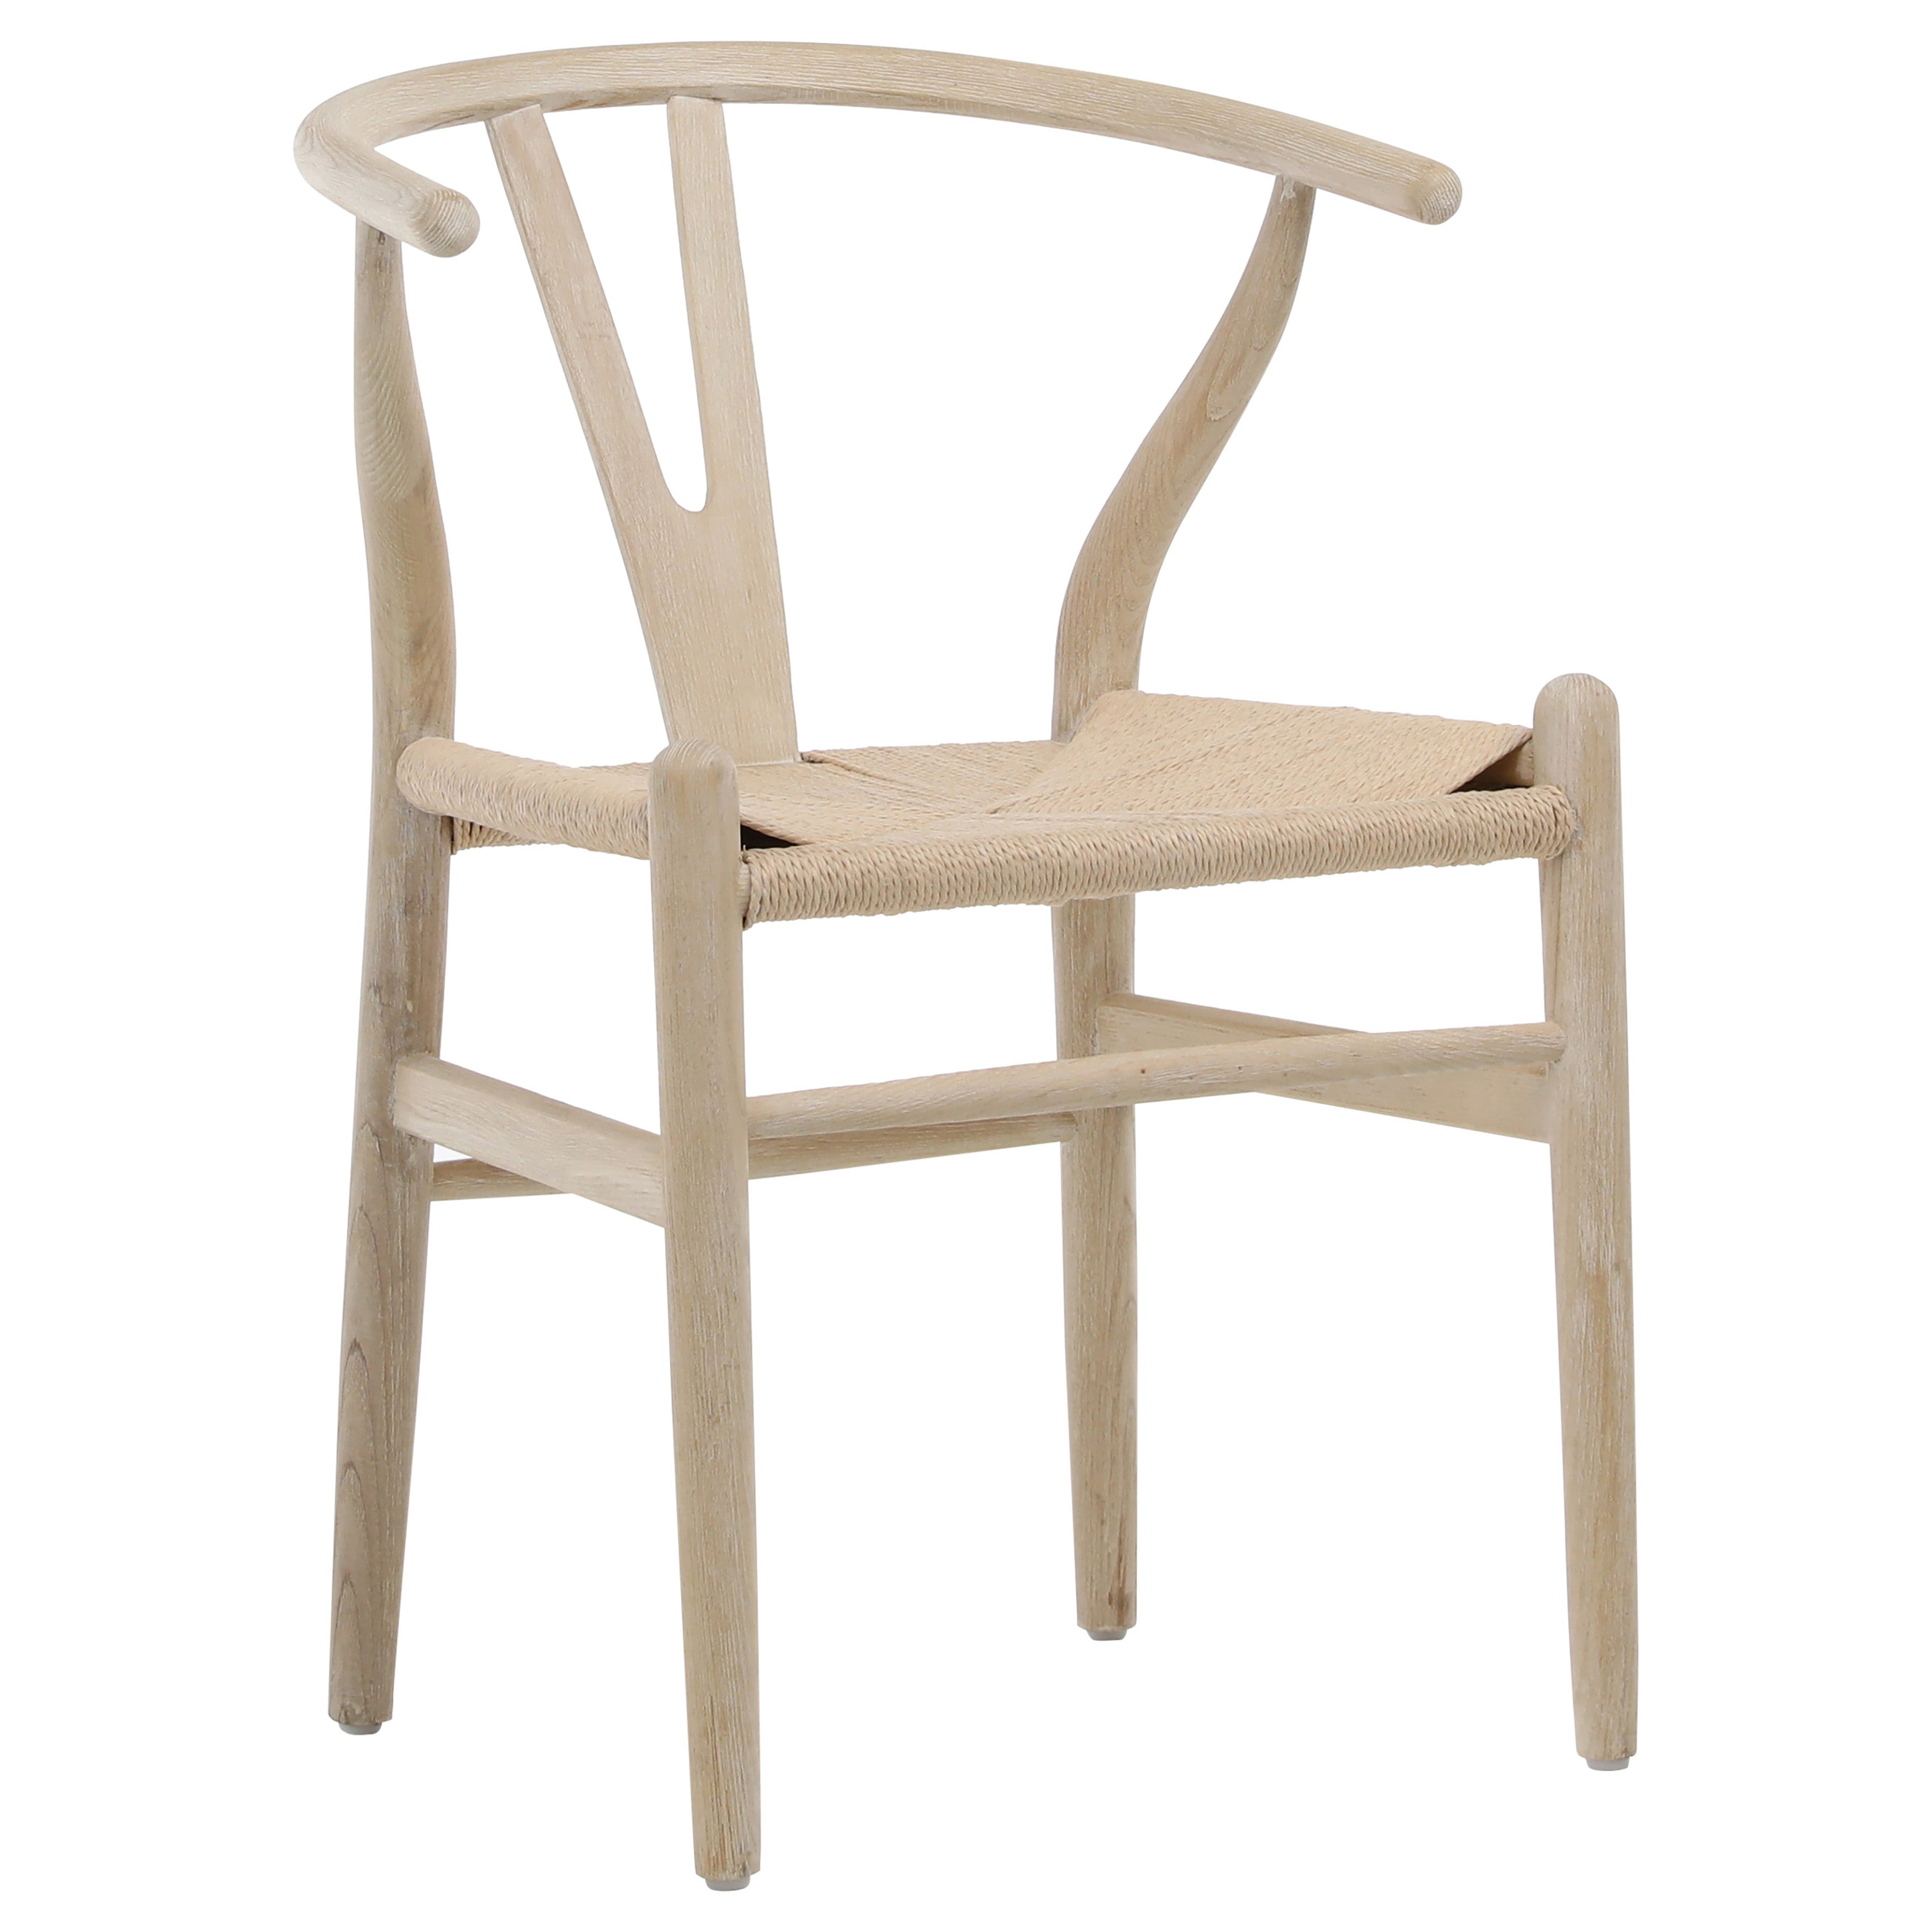 A trendy take on a classic mid-century modern wishbone chair. This dining chair stands out with its curved, oak wood frame and craft paper woven seating. The woven seat adds an organic feel to the sculptural form and cutout back design, while the light finish completes the fresh and airy look. Certainly, a statement piece.Arm_height : 26 in Amethyst Home provides interior design, new home construction design consulting, vintage area rugs, and lighting in the Miami metro area.